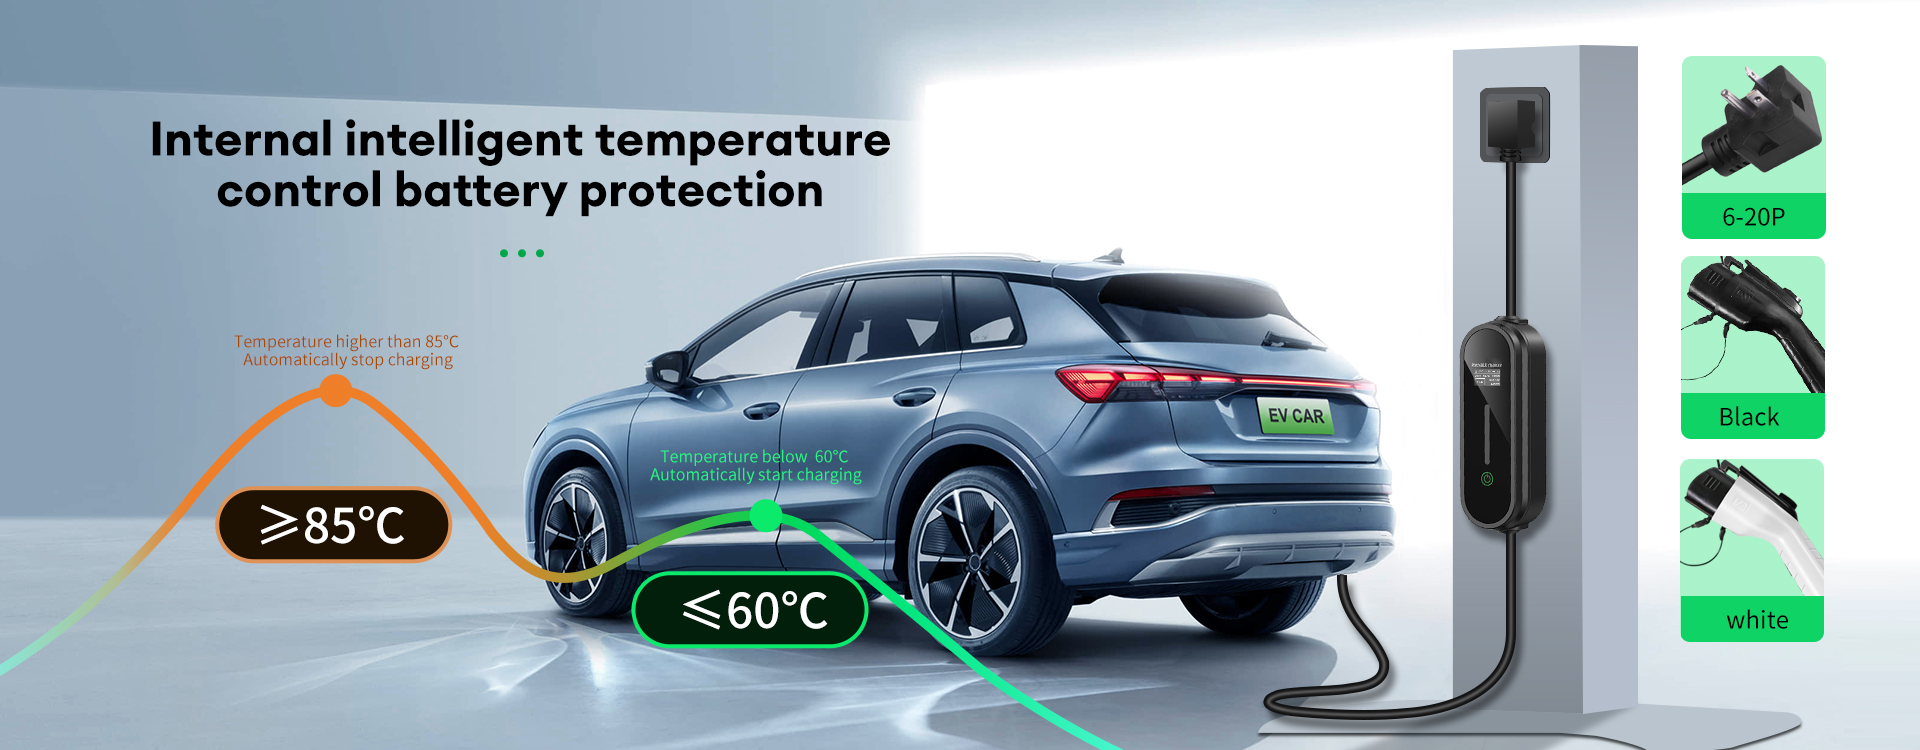 This is an advertisement for an electric vehicle (EV) charging system featuring internal intelligent temperature control for battery protection. The image shows a modern electric car connected to a charging station. A graphic overlaid on the image indicates that if the temperature is above 85°C, the system will automatically stop charging, and if it is below 60°C, it will automatically start charging.